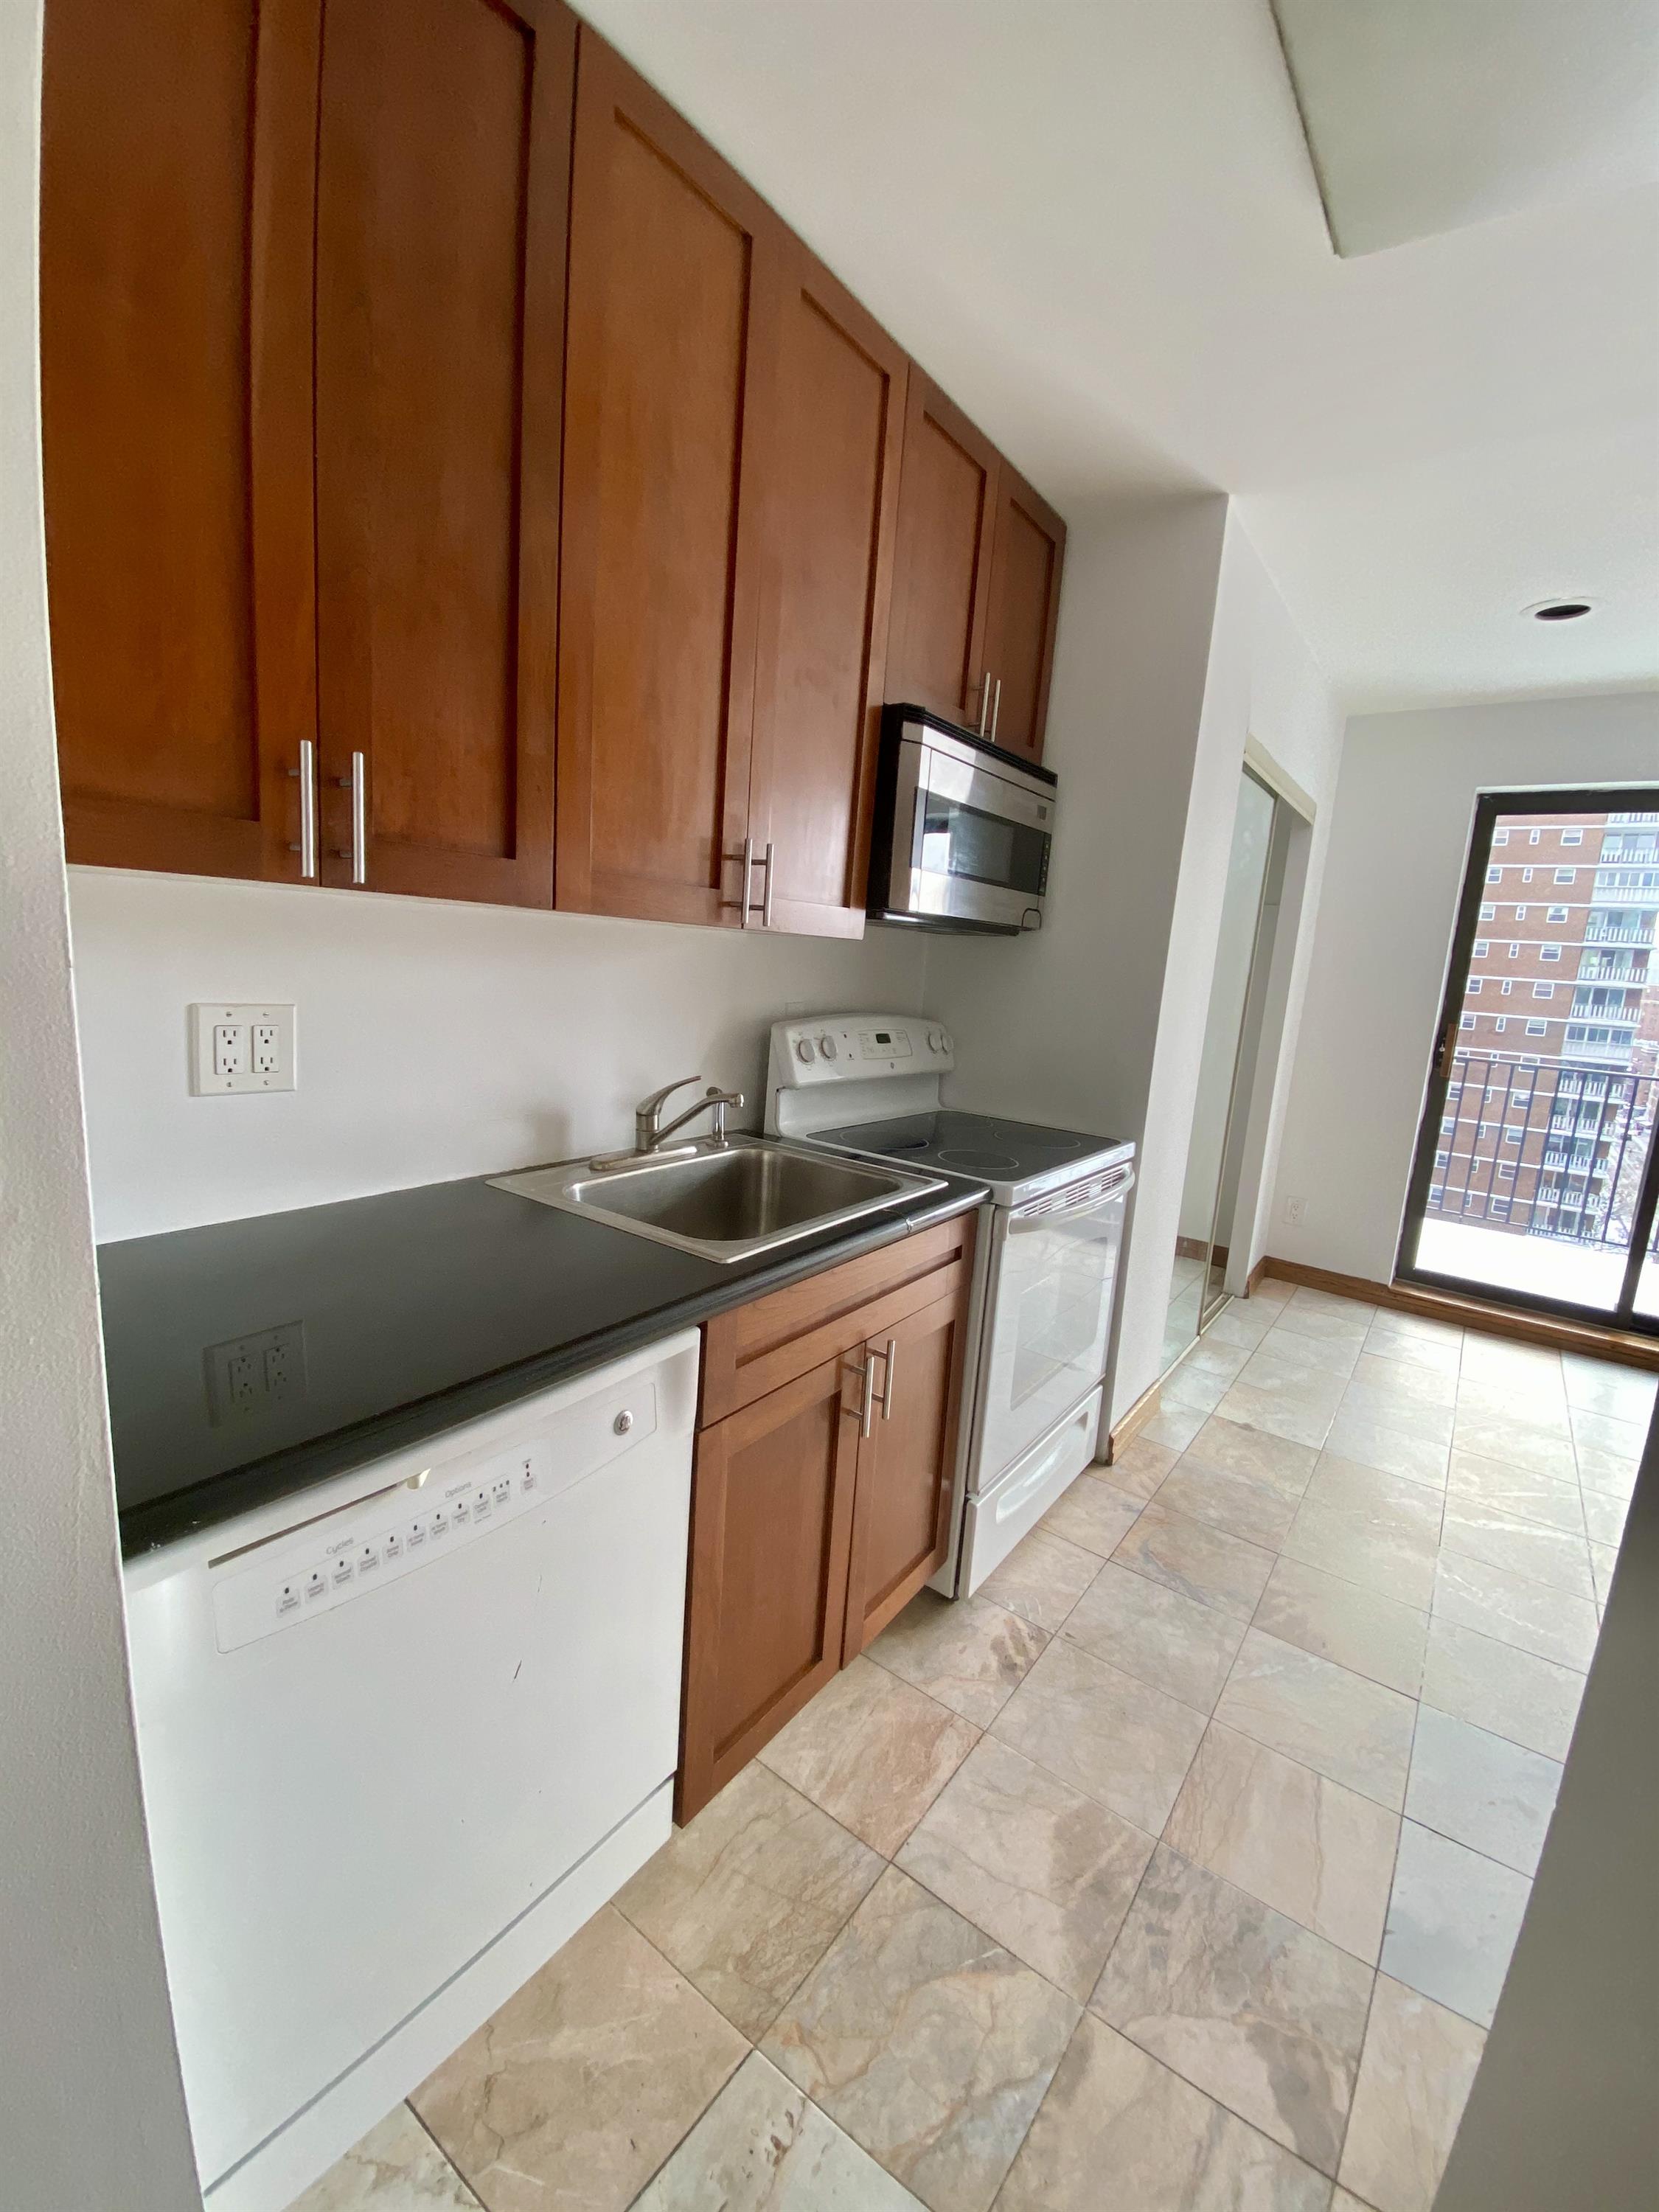 370 West 30th Street - Available Units